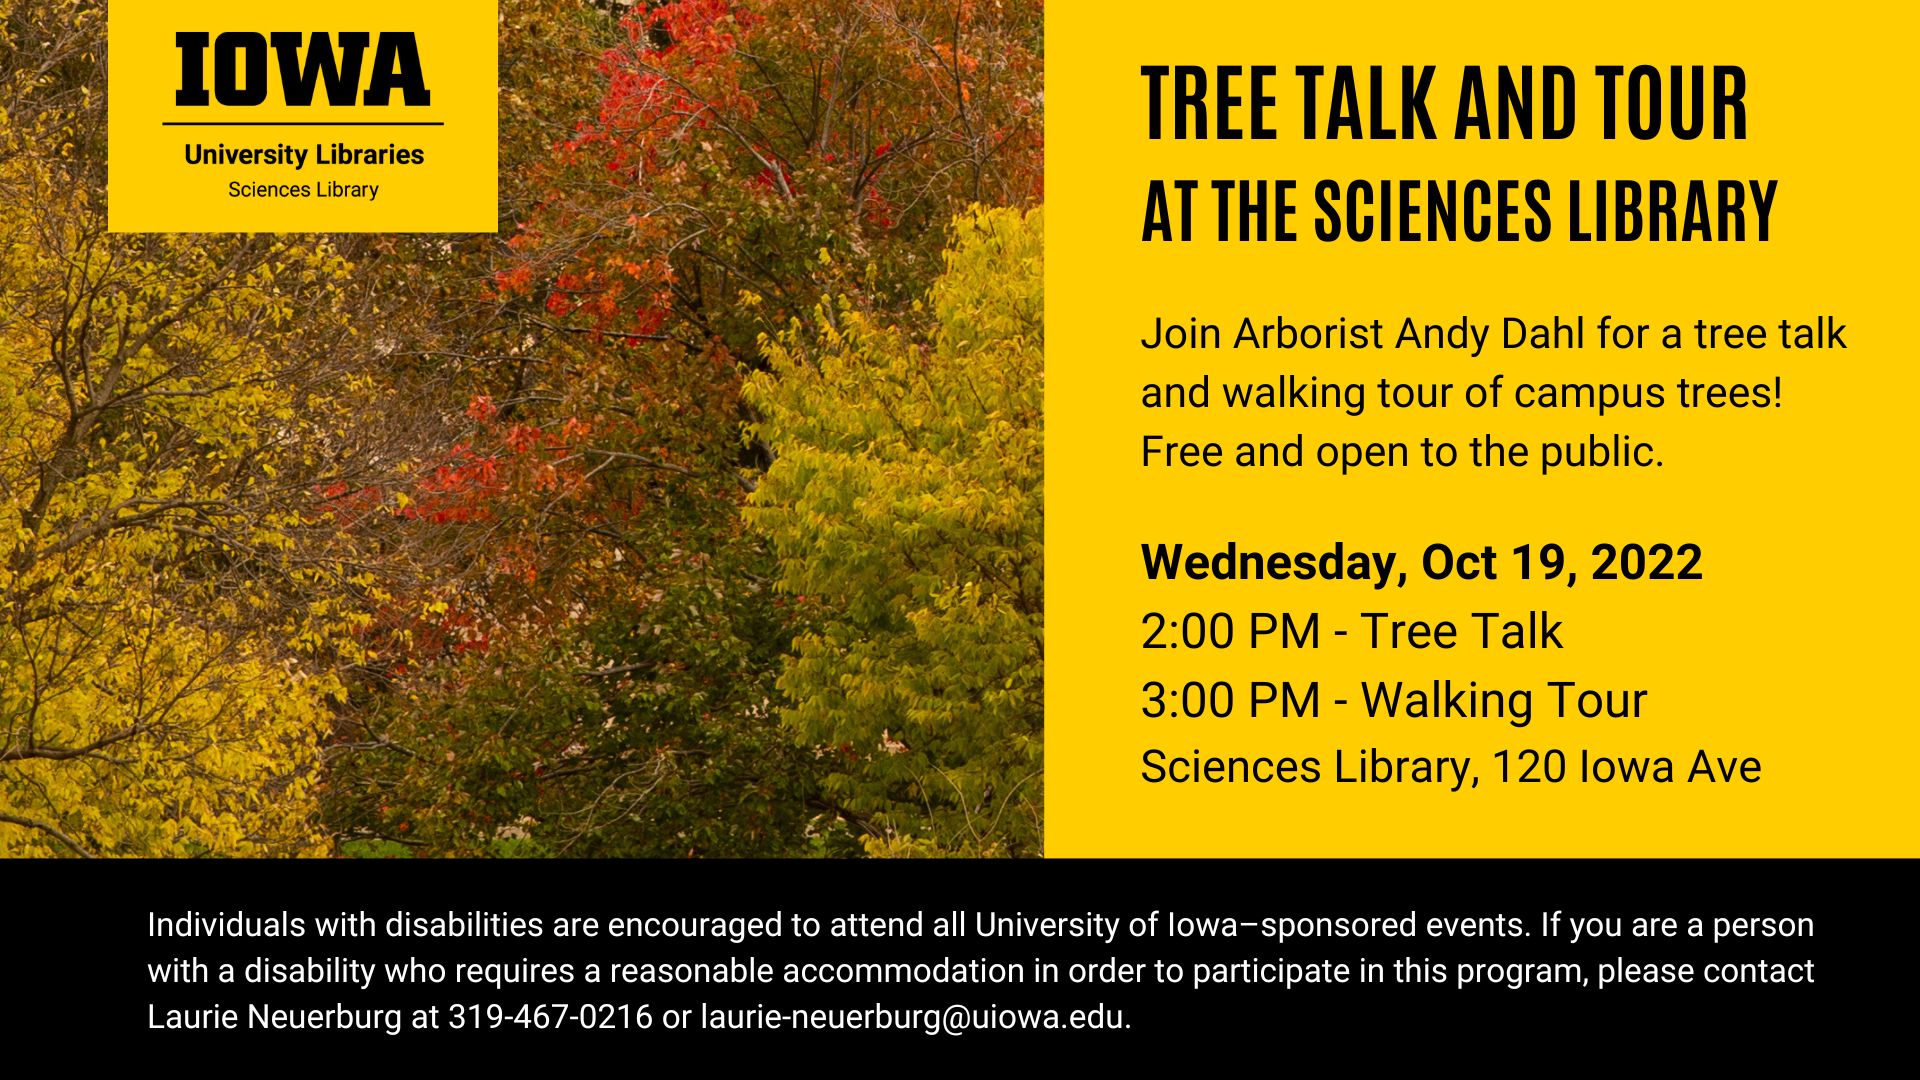 Tree Talk and Tour at the Sciences Library. Join Arborist Andy Dahl for a tree talk and walking tour of campus trees! Free and open to the public. Wendesday, October 19, 2022. 2:00 PM Tree Talk. 3:00 PM Walking Tour. Sciences Library. 120 Iowa Avenue. Individuals with disabilities are encouraged to attend all University of Iowa sponsored events. If you are a person with a disability who requires a reasonable accommodation in order to participate in this program, please contact Laurie Neuerburg at 319-467-0216 or laurie-neuerburg@uiowa.edu.